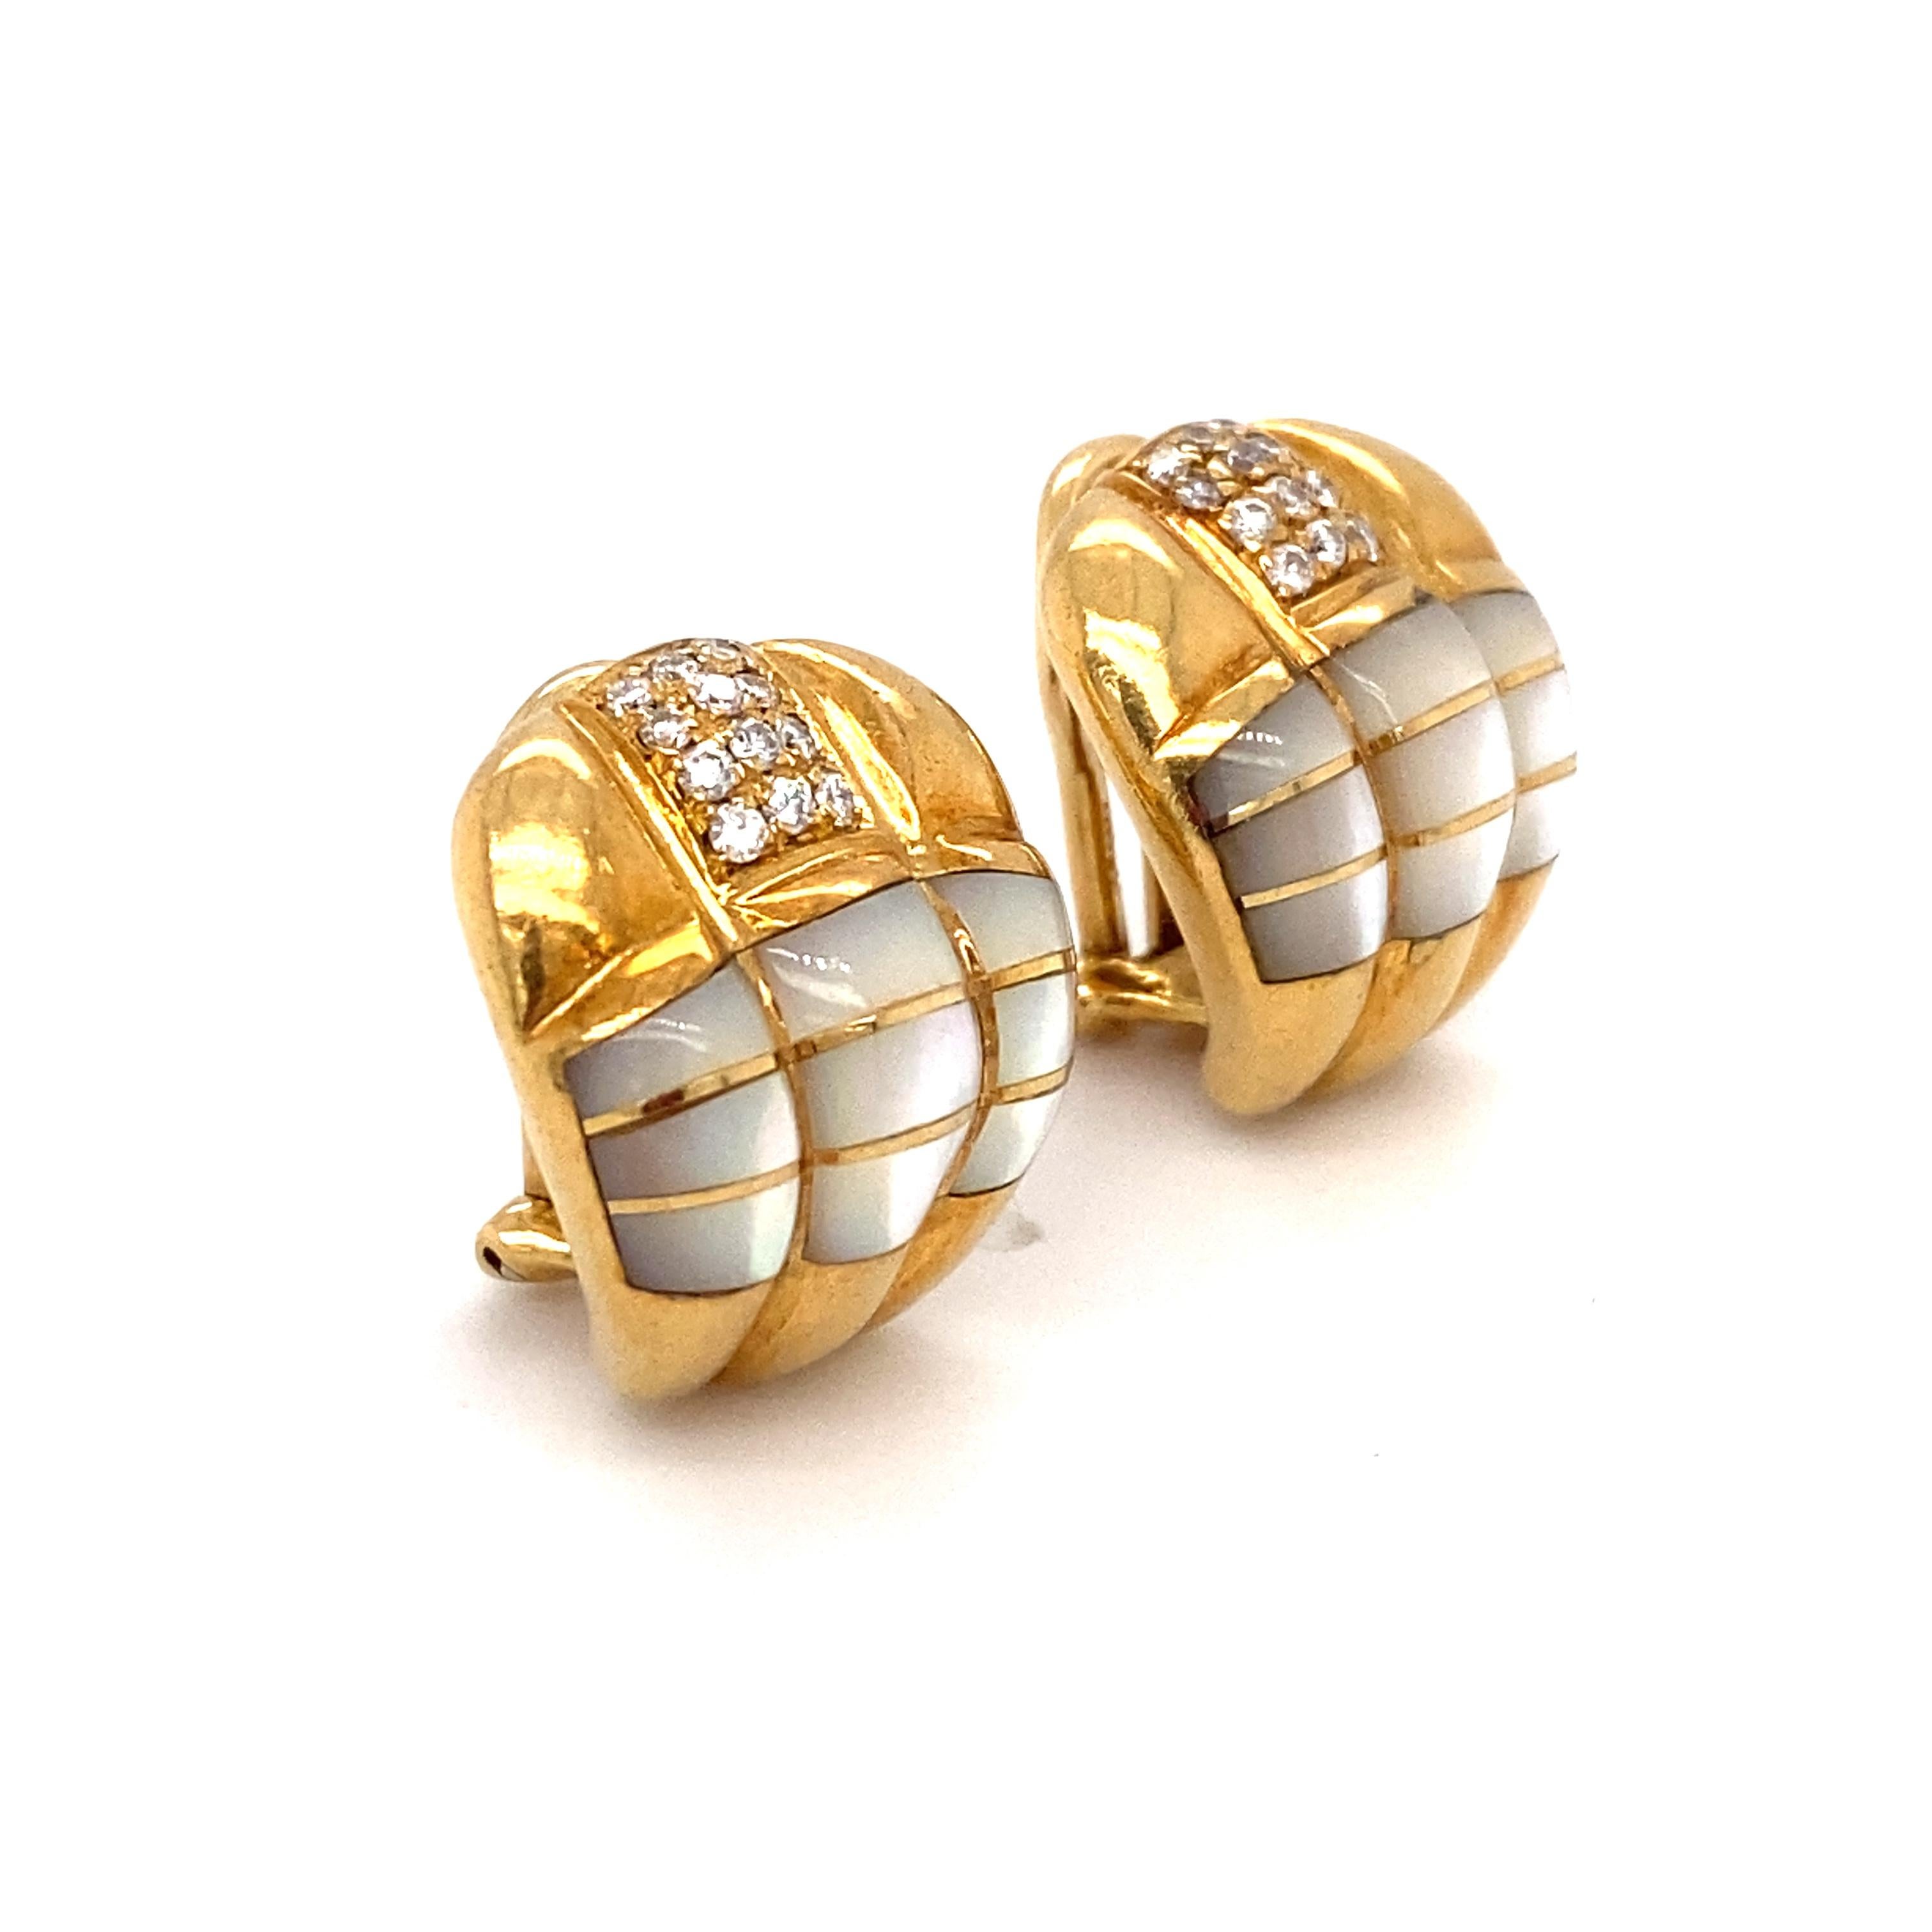 Item Details: These unique clip on earrings have a cobra-like design with rich mother of pearl and accent diamonds.

Circa: 1960s
Metal Type: 18 Karat Yellow Gold
Weight: 16.6 Grams
Dimensions: 0.75 Inch Length

Diamond Details:

Carat: 0.40 carat